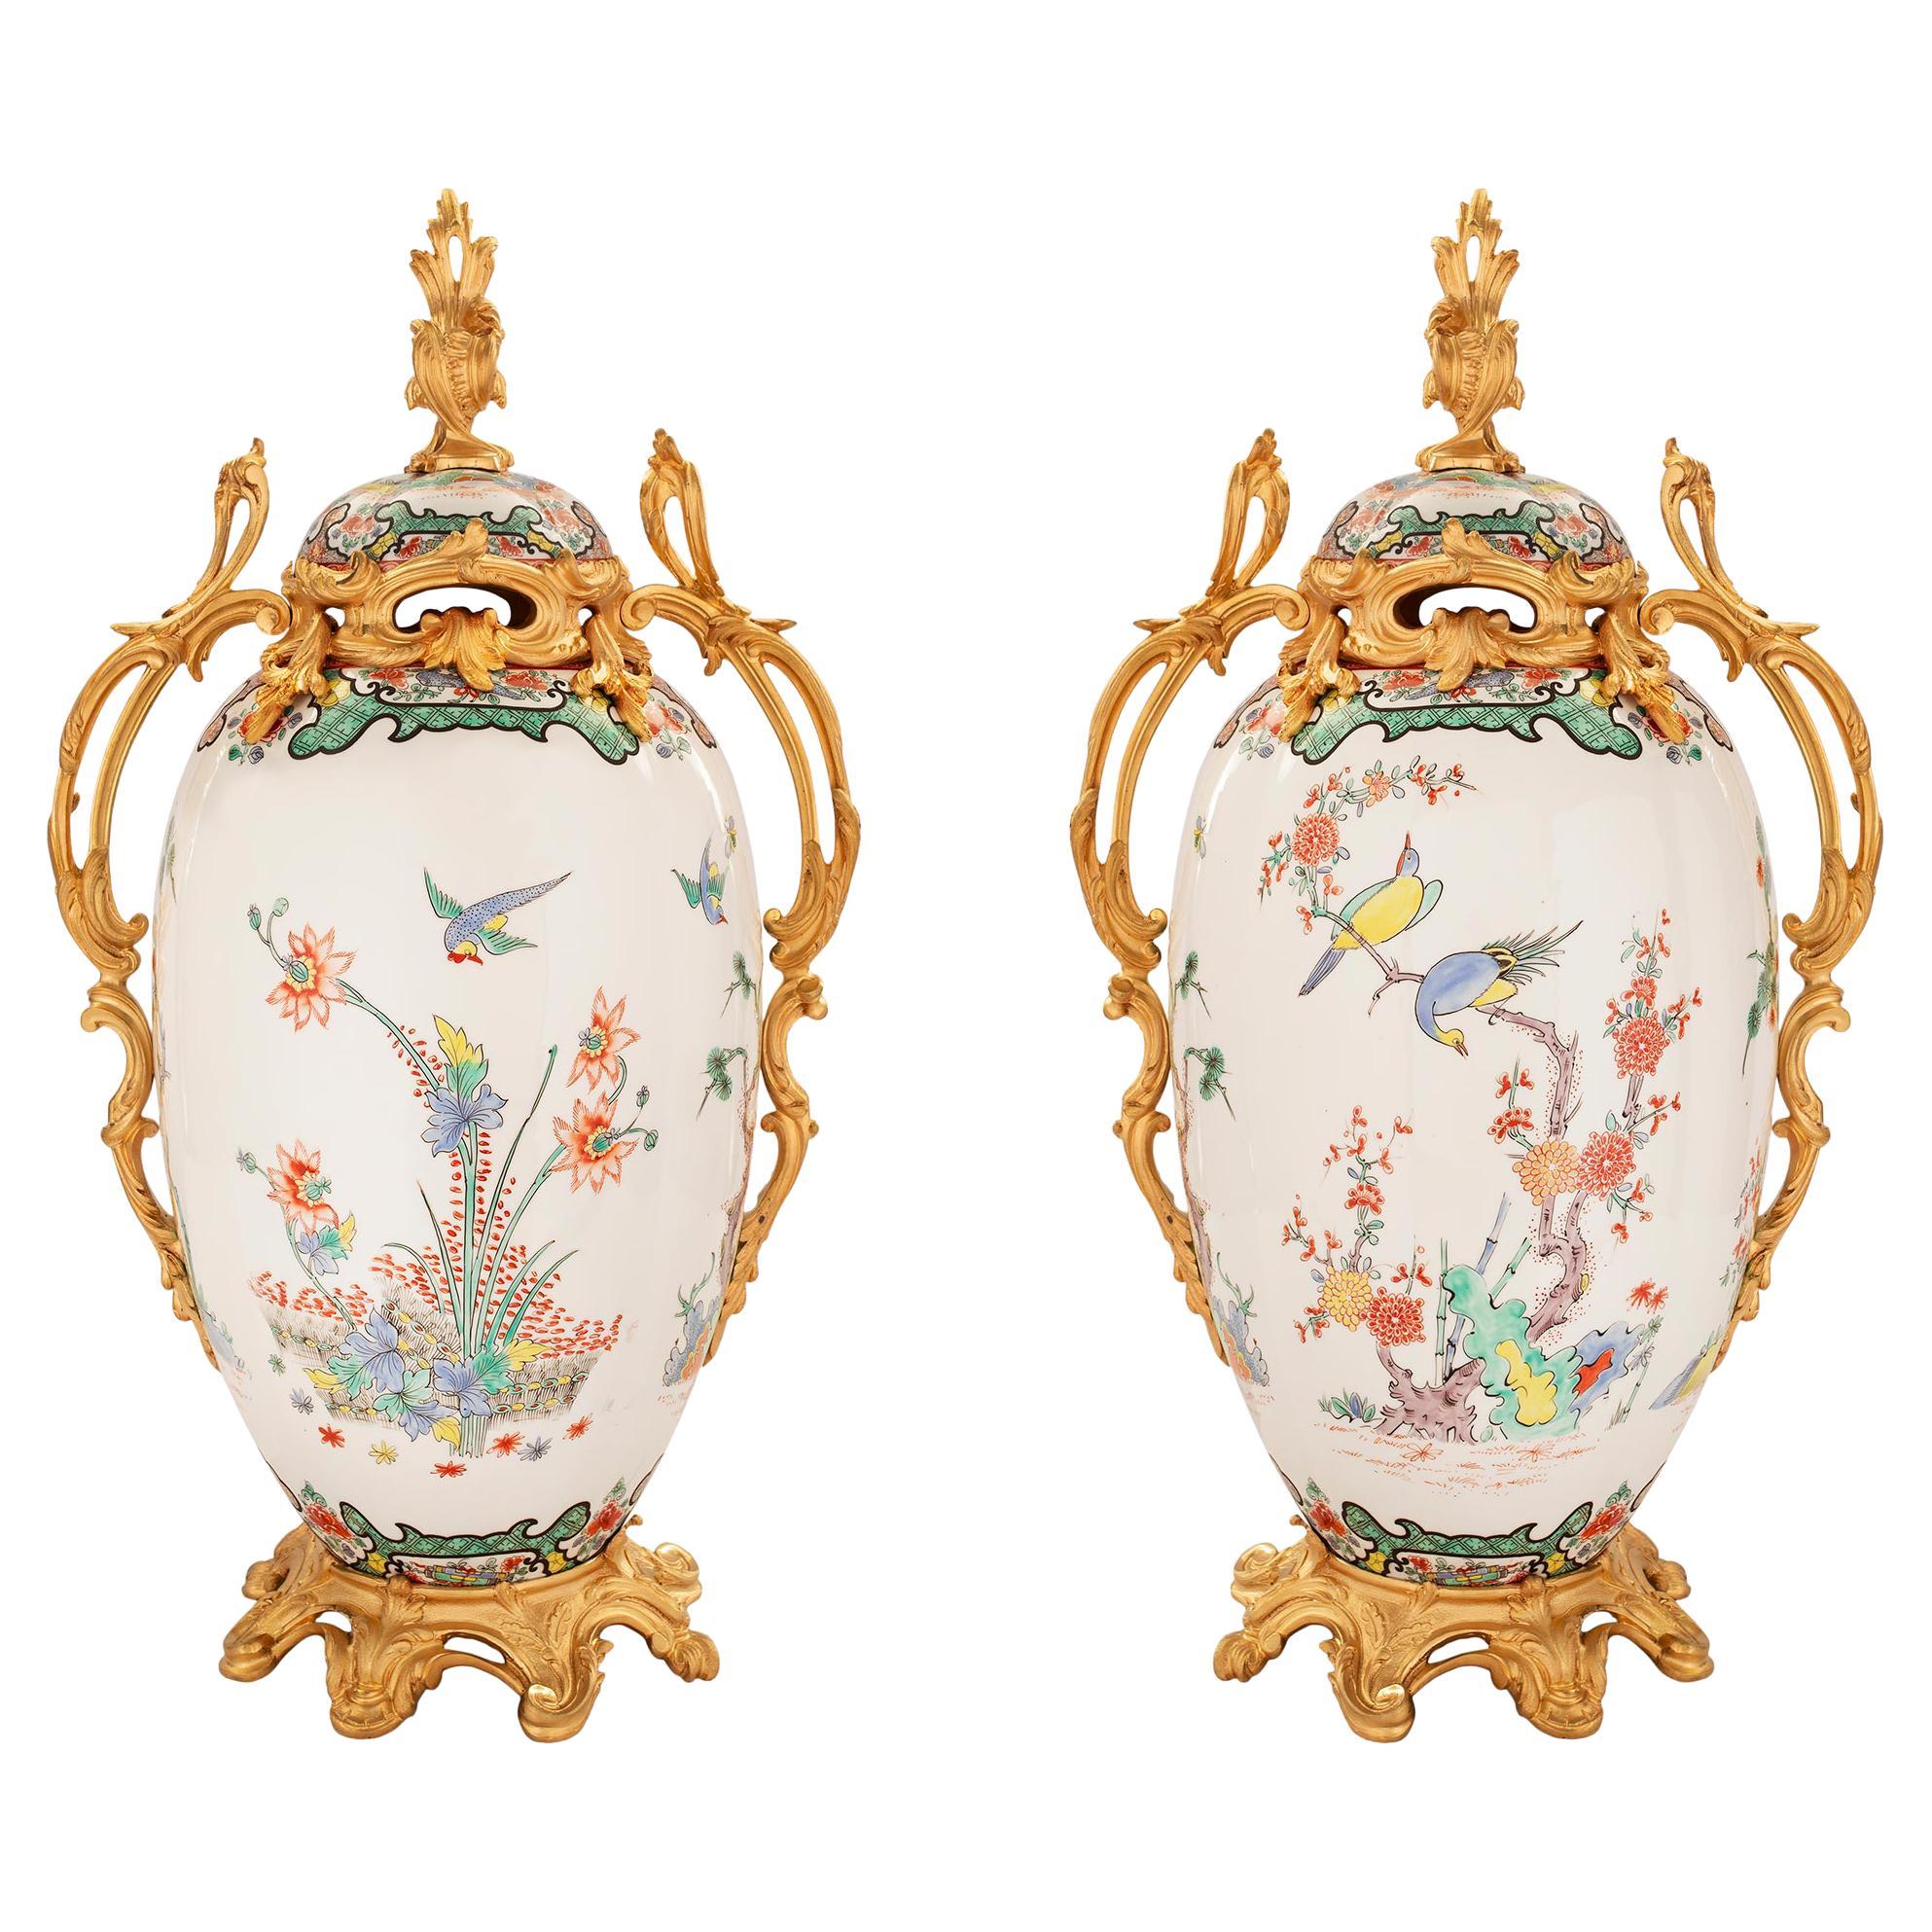 Pair of French 19th Century Louis XV St. Porcelain & Ormolu Mounted Lidded Urns For Sale